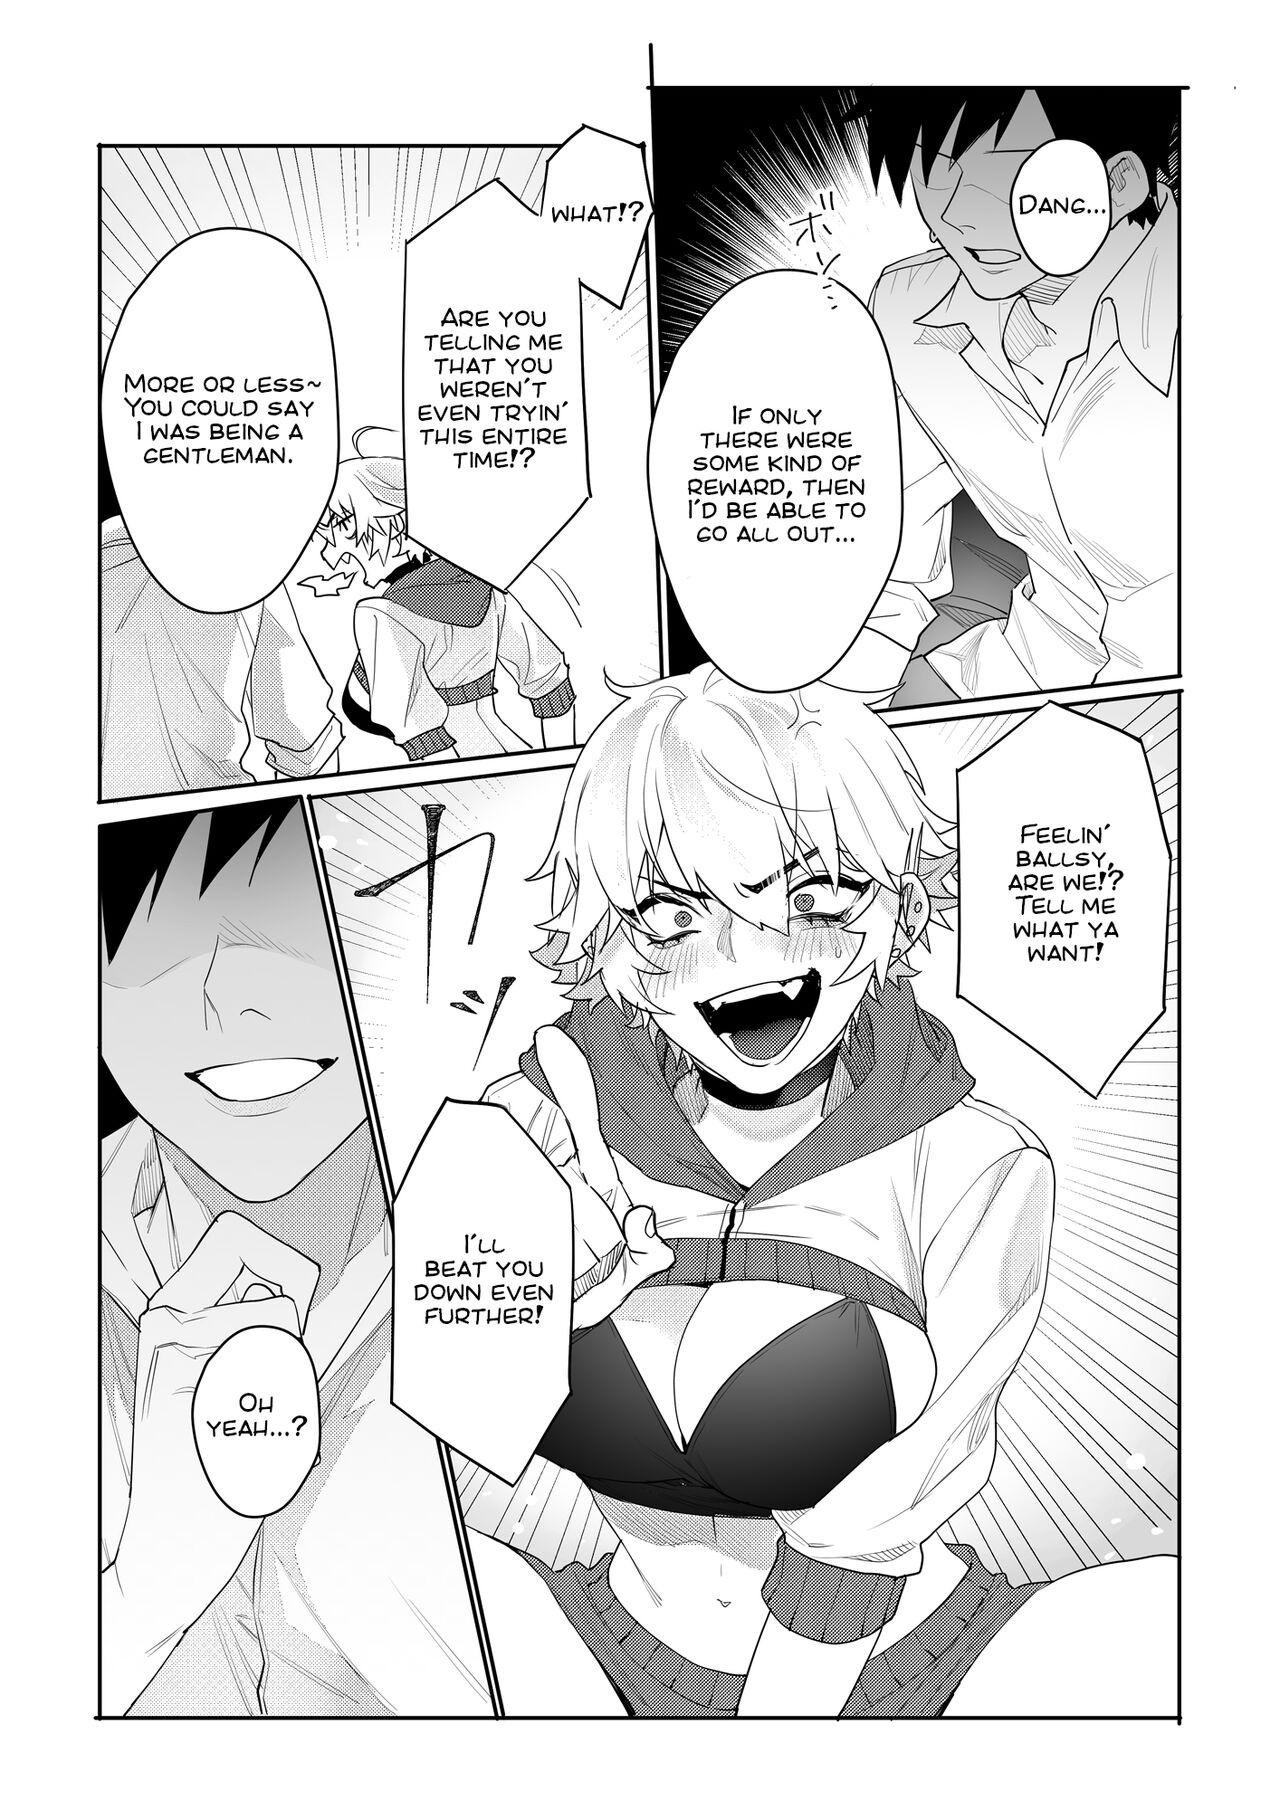 Best Blow Job Ever Gamer kanojo no oppai monde mita kekka… | What Happens if You Try to Fondle a Gamer Chick's Boobs... - Original Amatoriale - Page 7